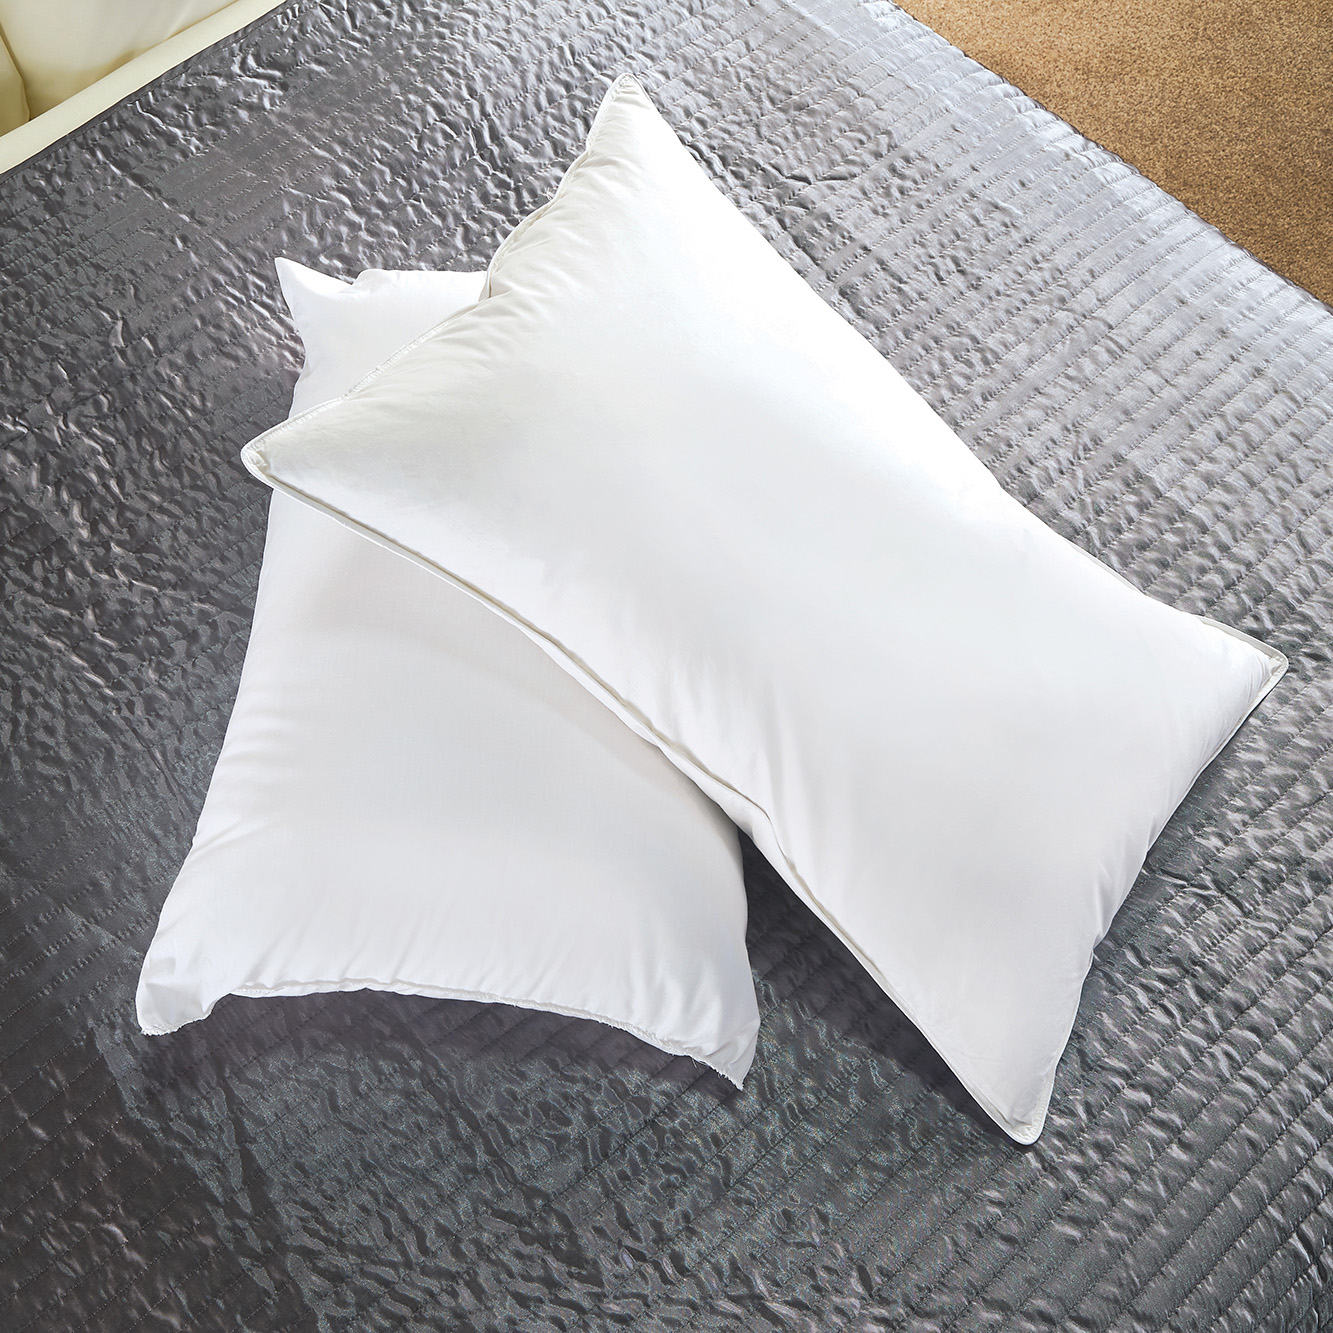 Pair Luxury Duck Feather Pillows with 85% Feather 15% Down 100% Cotton Cover 